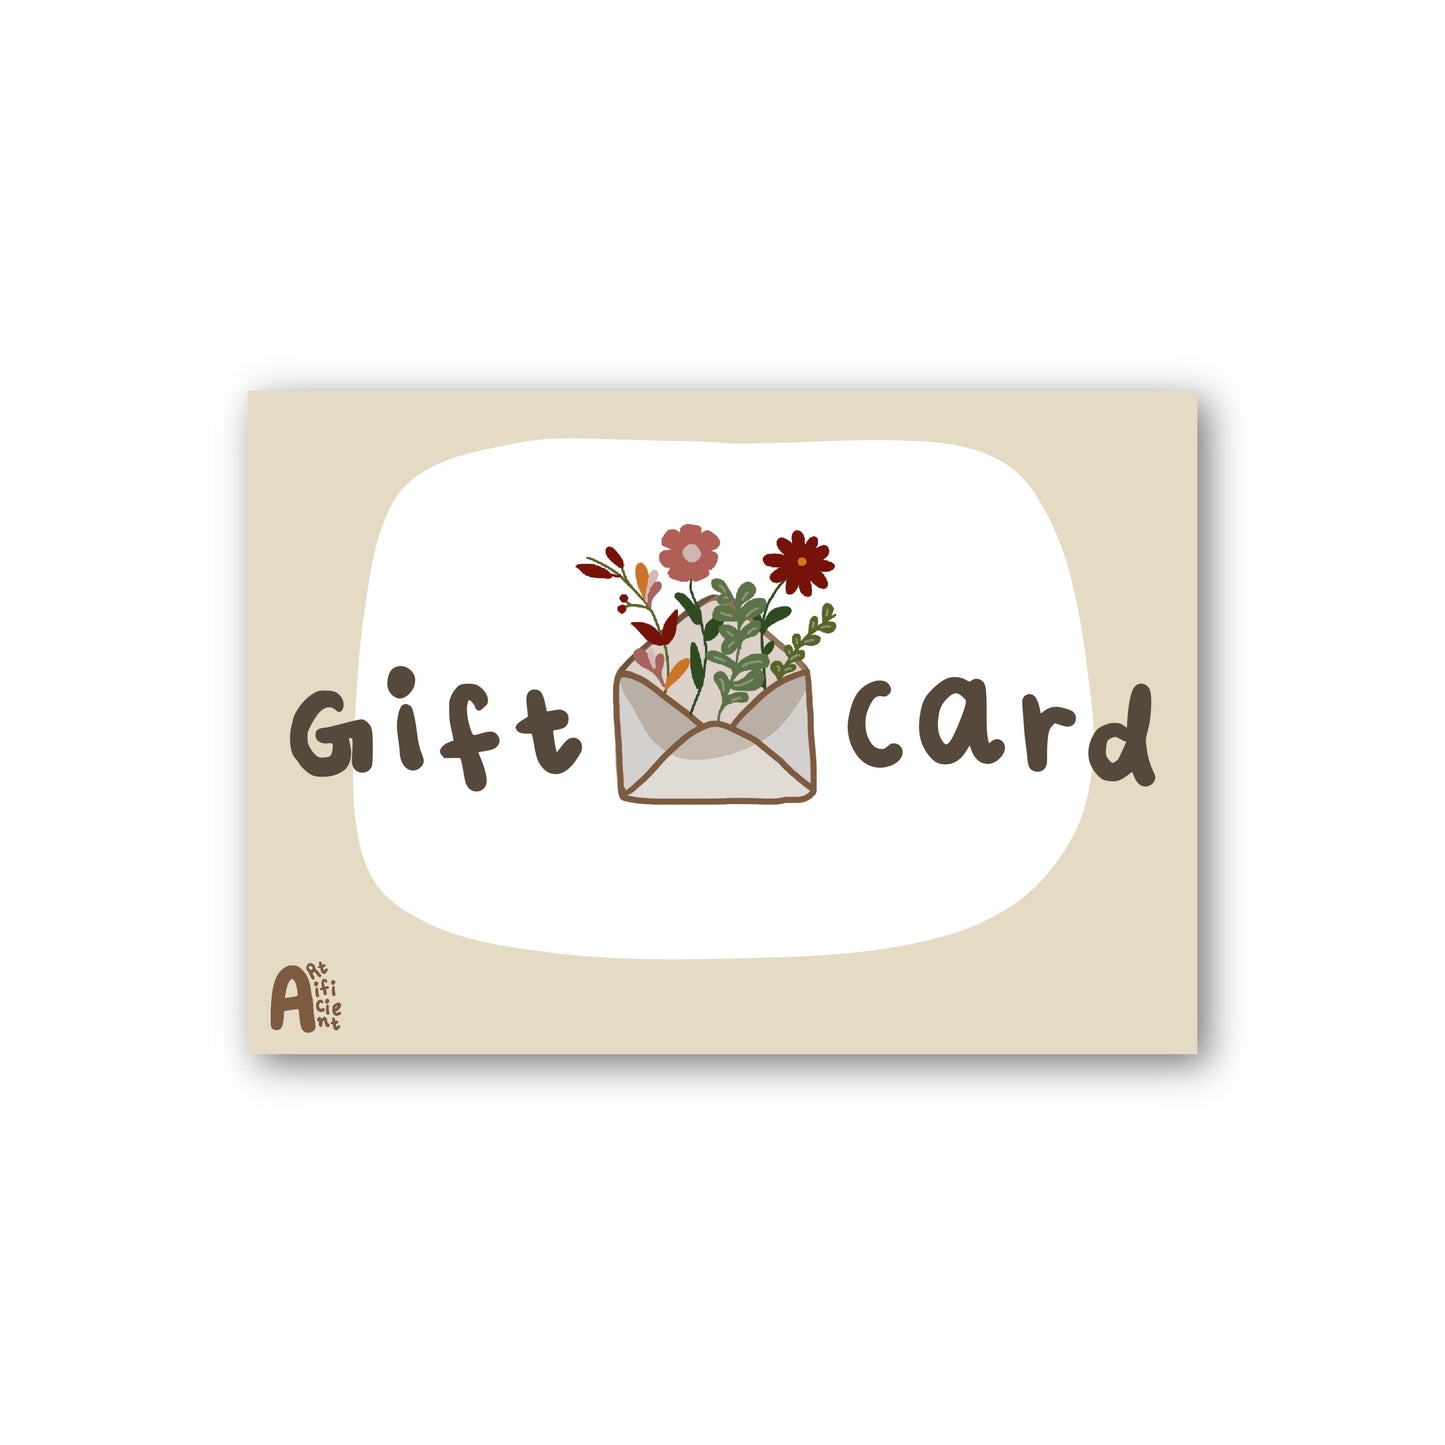 Artificient's Gift Card